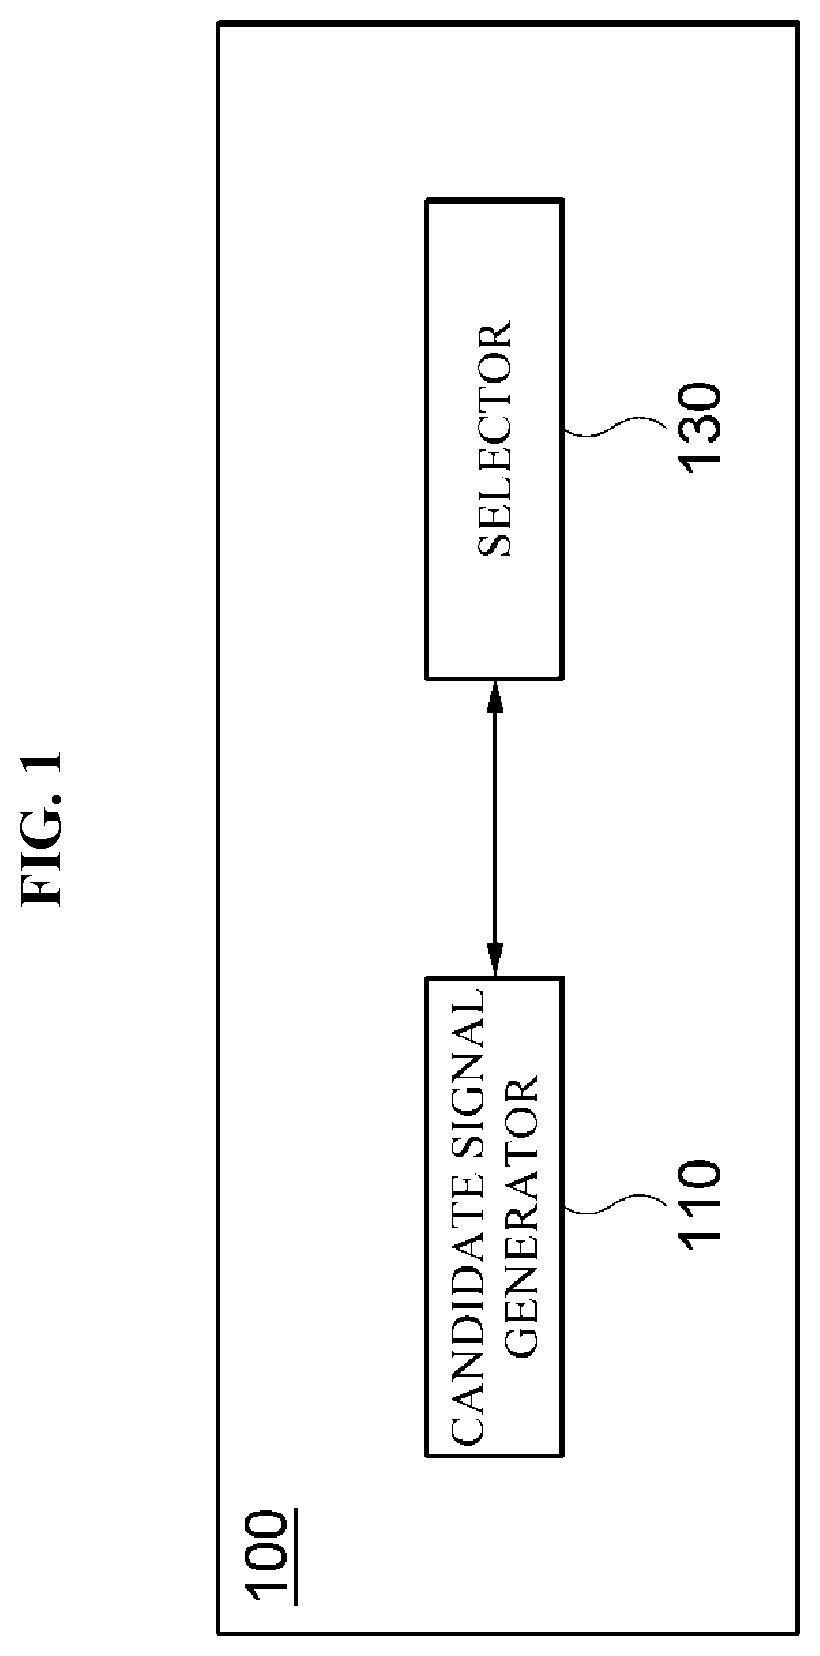 Method for signal modulation in filter bank multi-carrier system